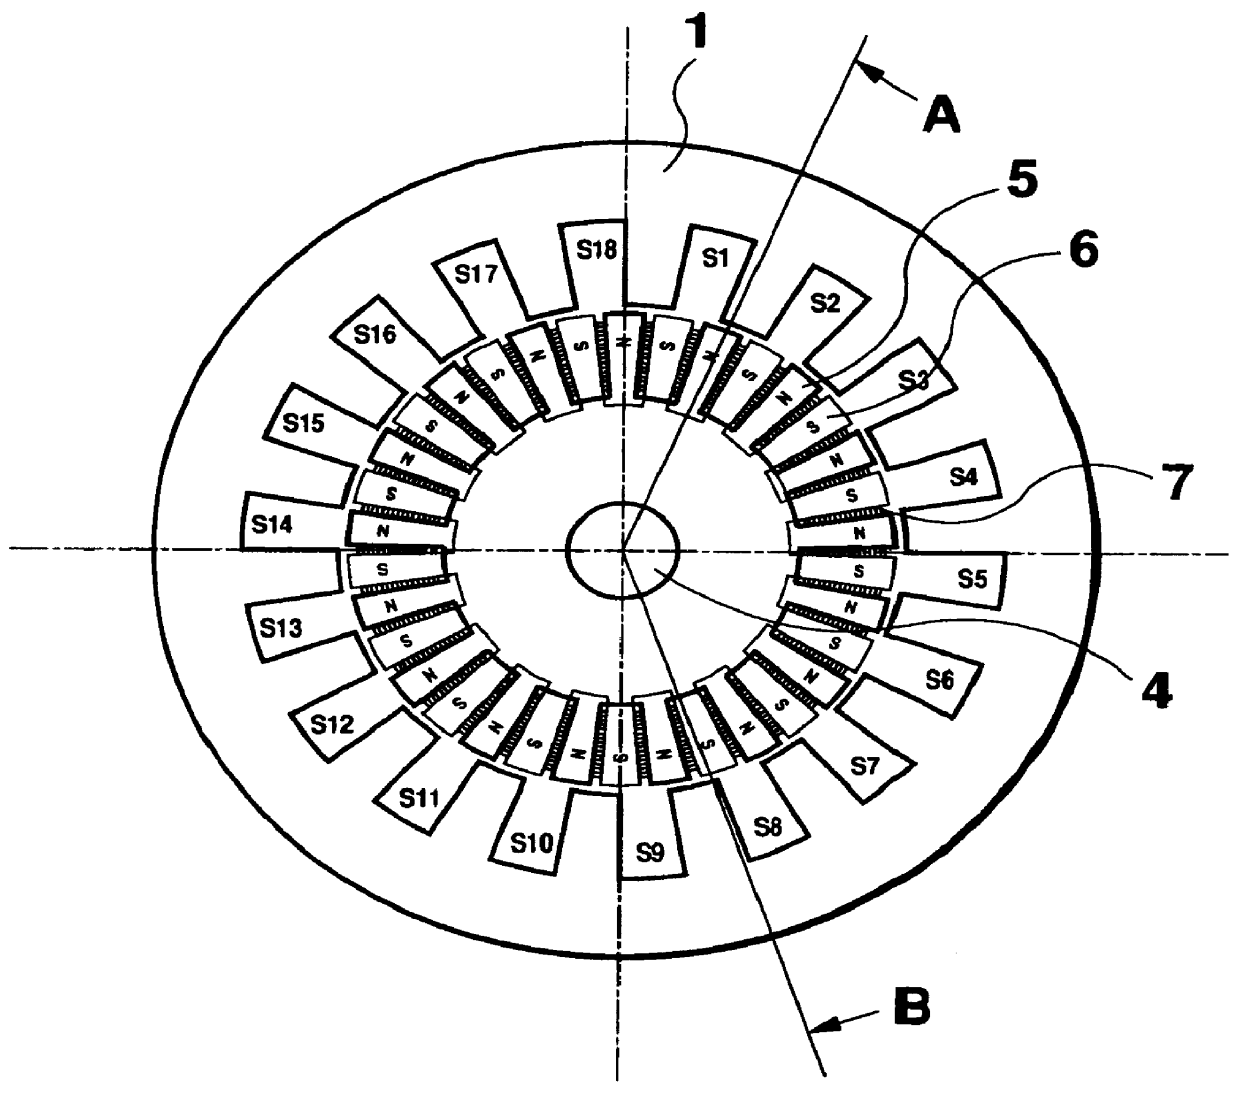 Permanent magnet motor with specific magnets and magnetic circuit arrangement